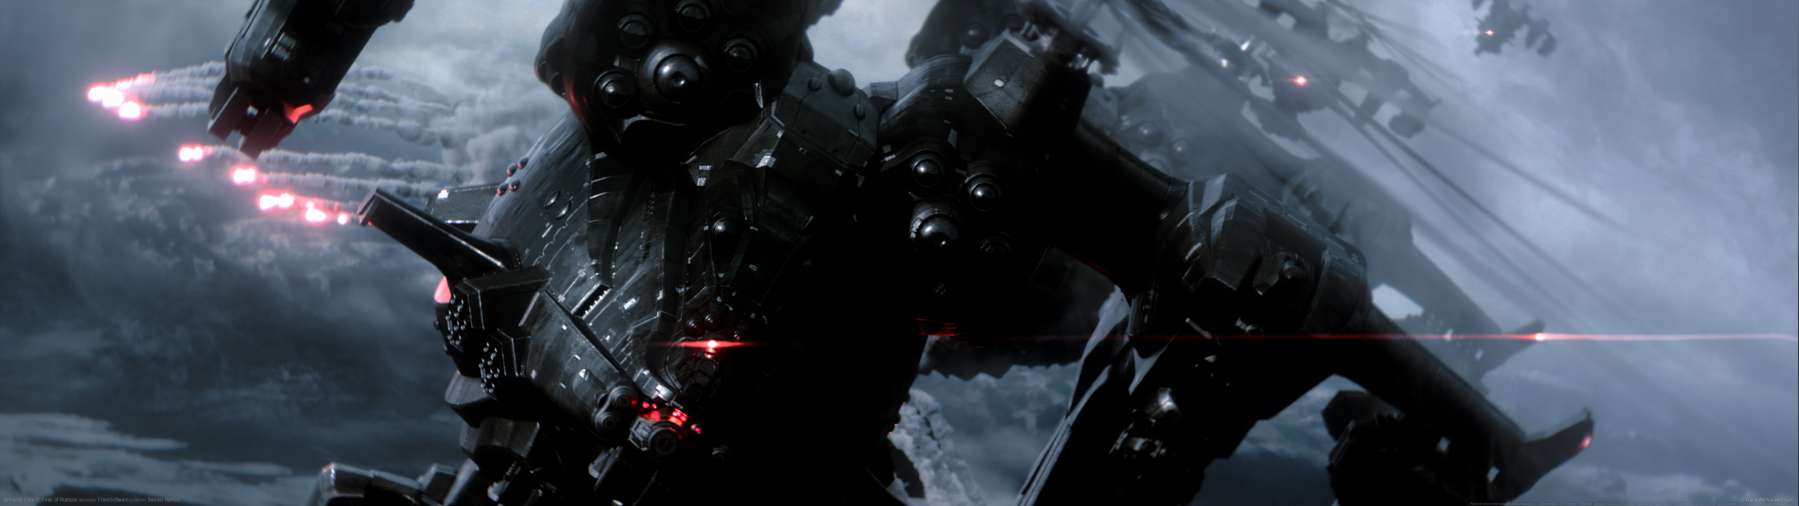 Armored Core 6: Fires of Rubicon superwide fond d'cran 02